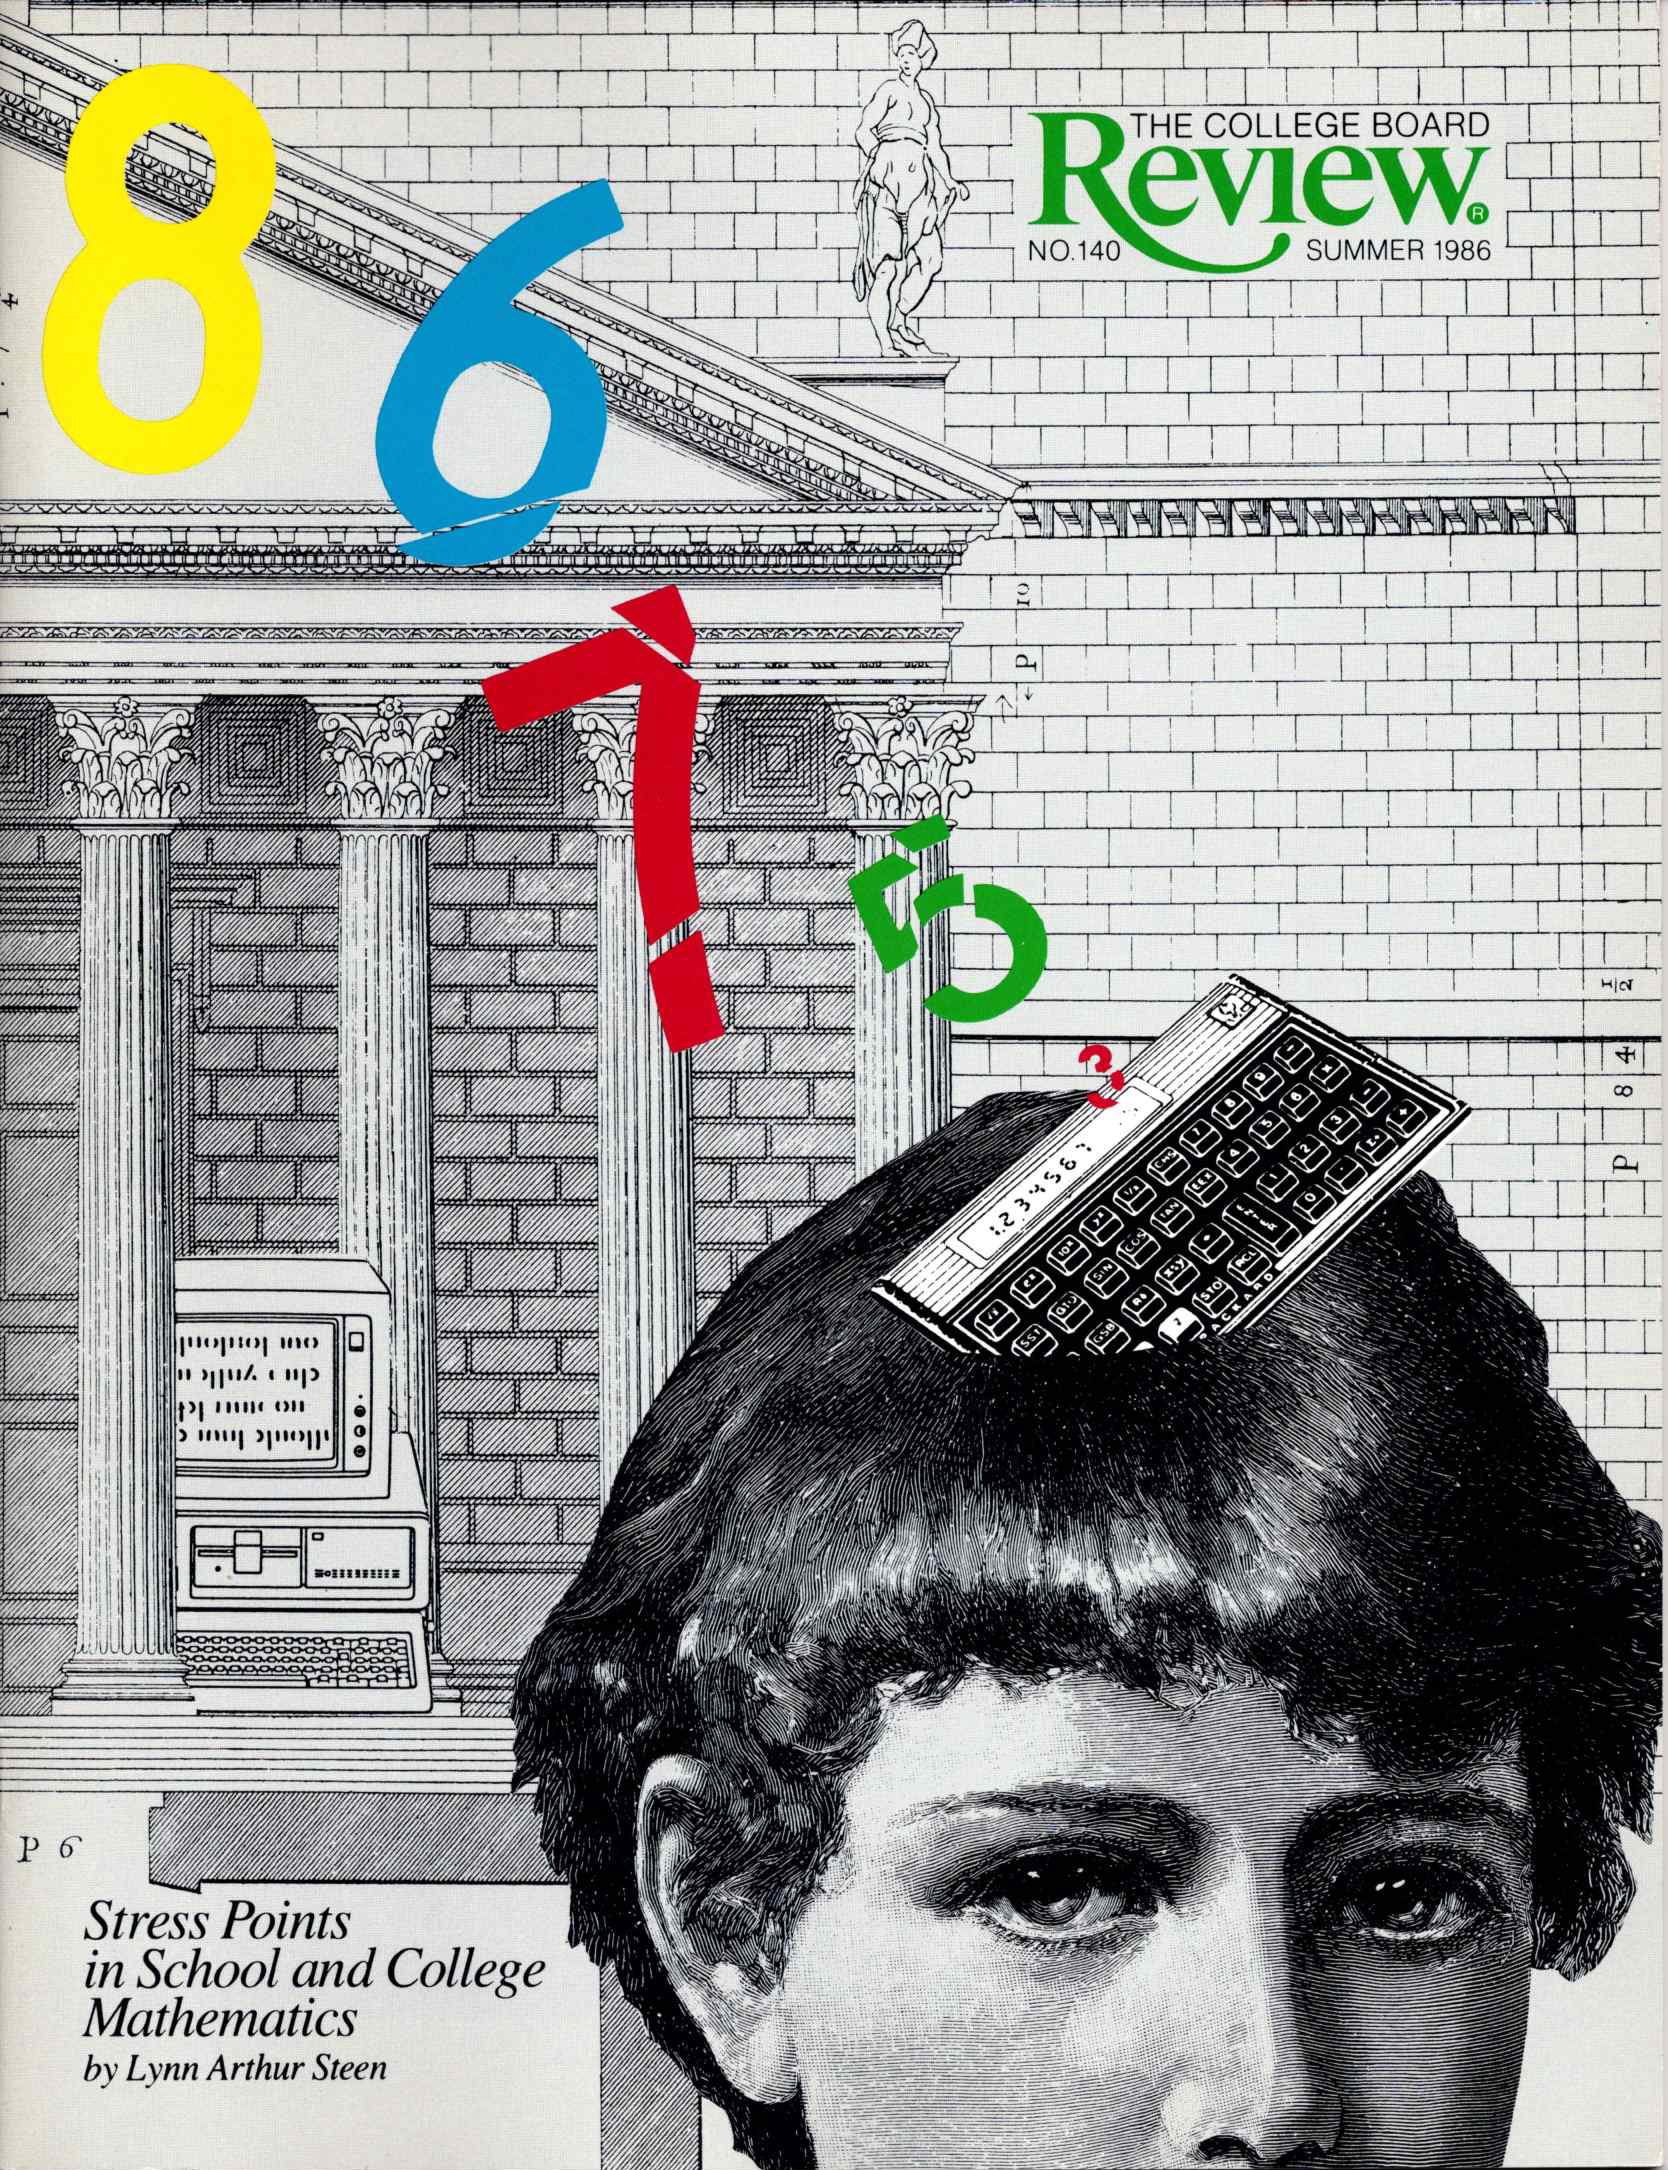 the cover of the summer 1986 issue of the college board review featuring an illustration of a female head with a keyboard and the numbers 5 6 7 8 floating to the top of the image with a classical building in the background